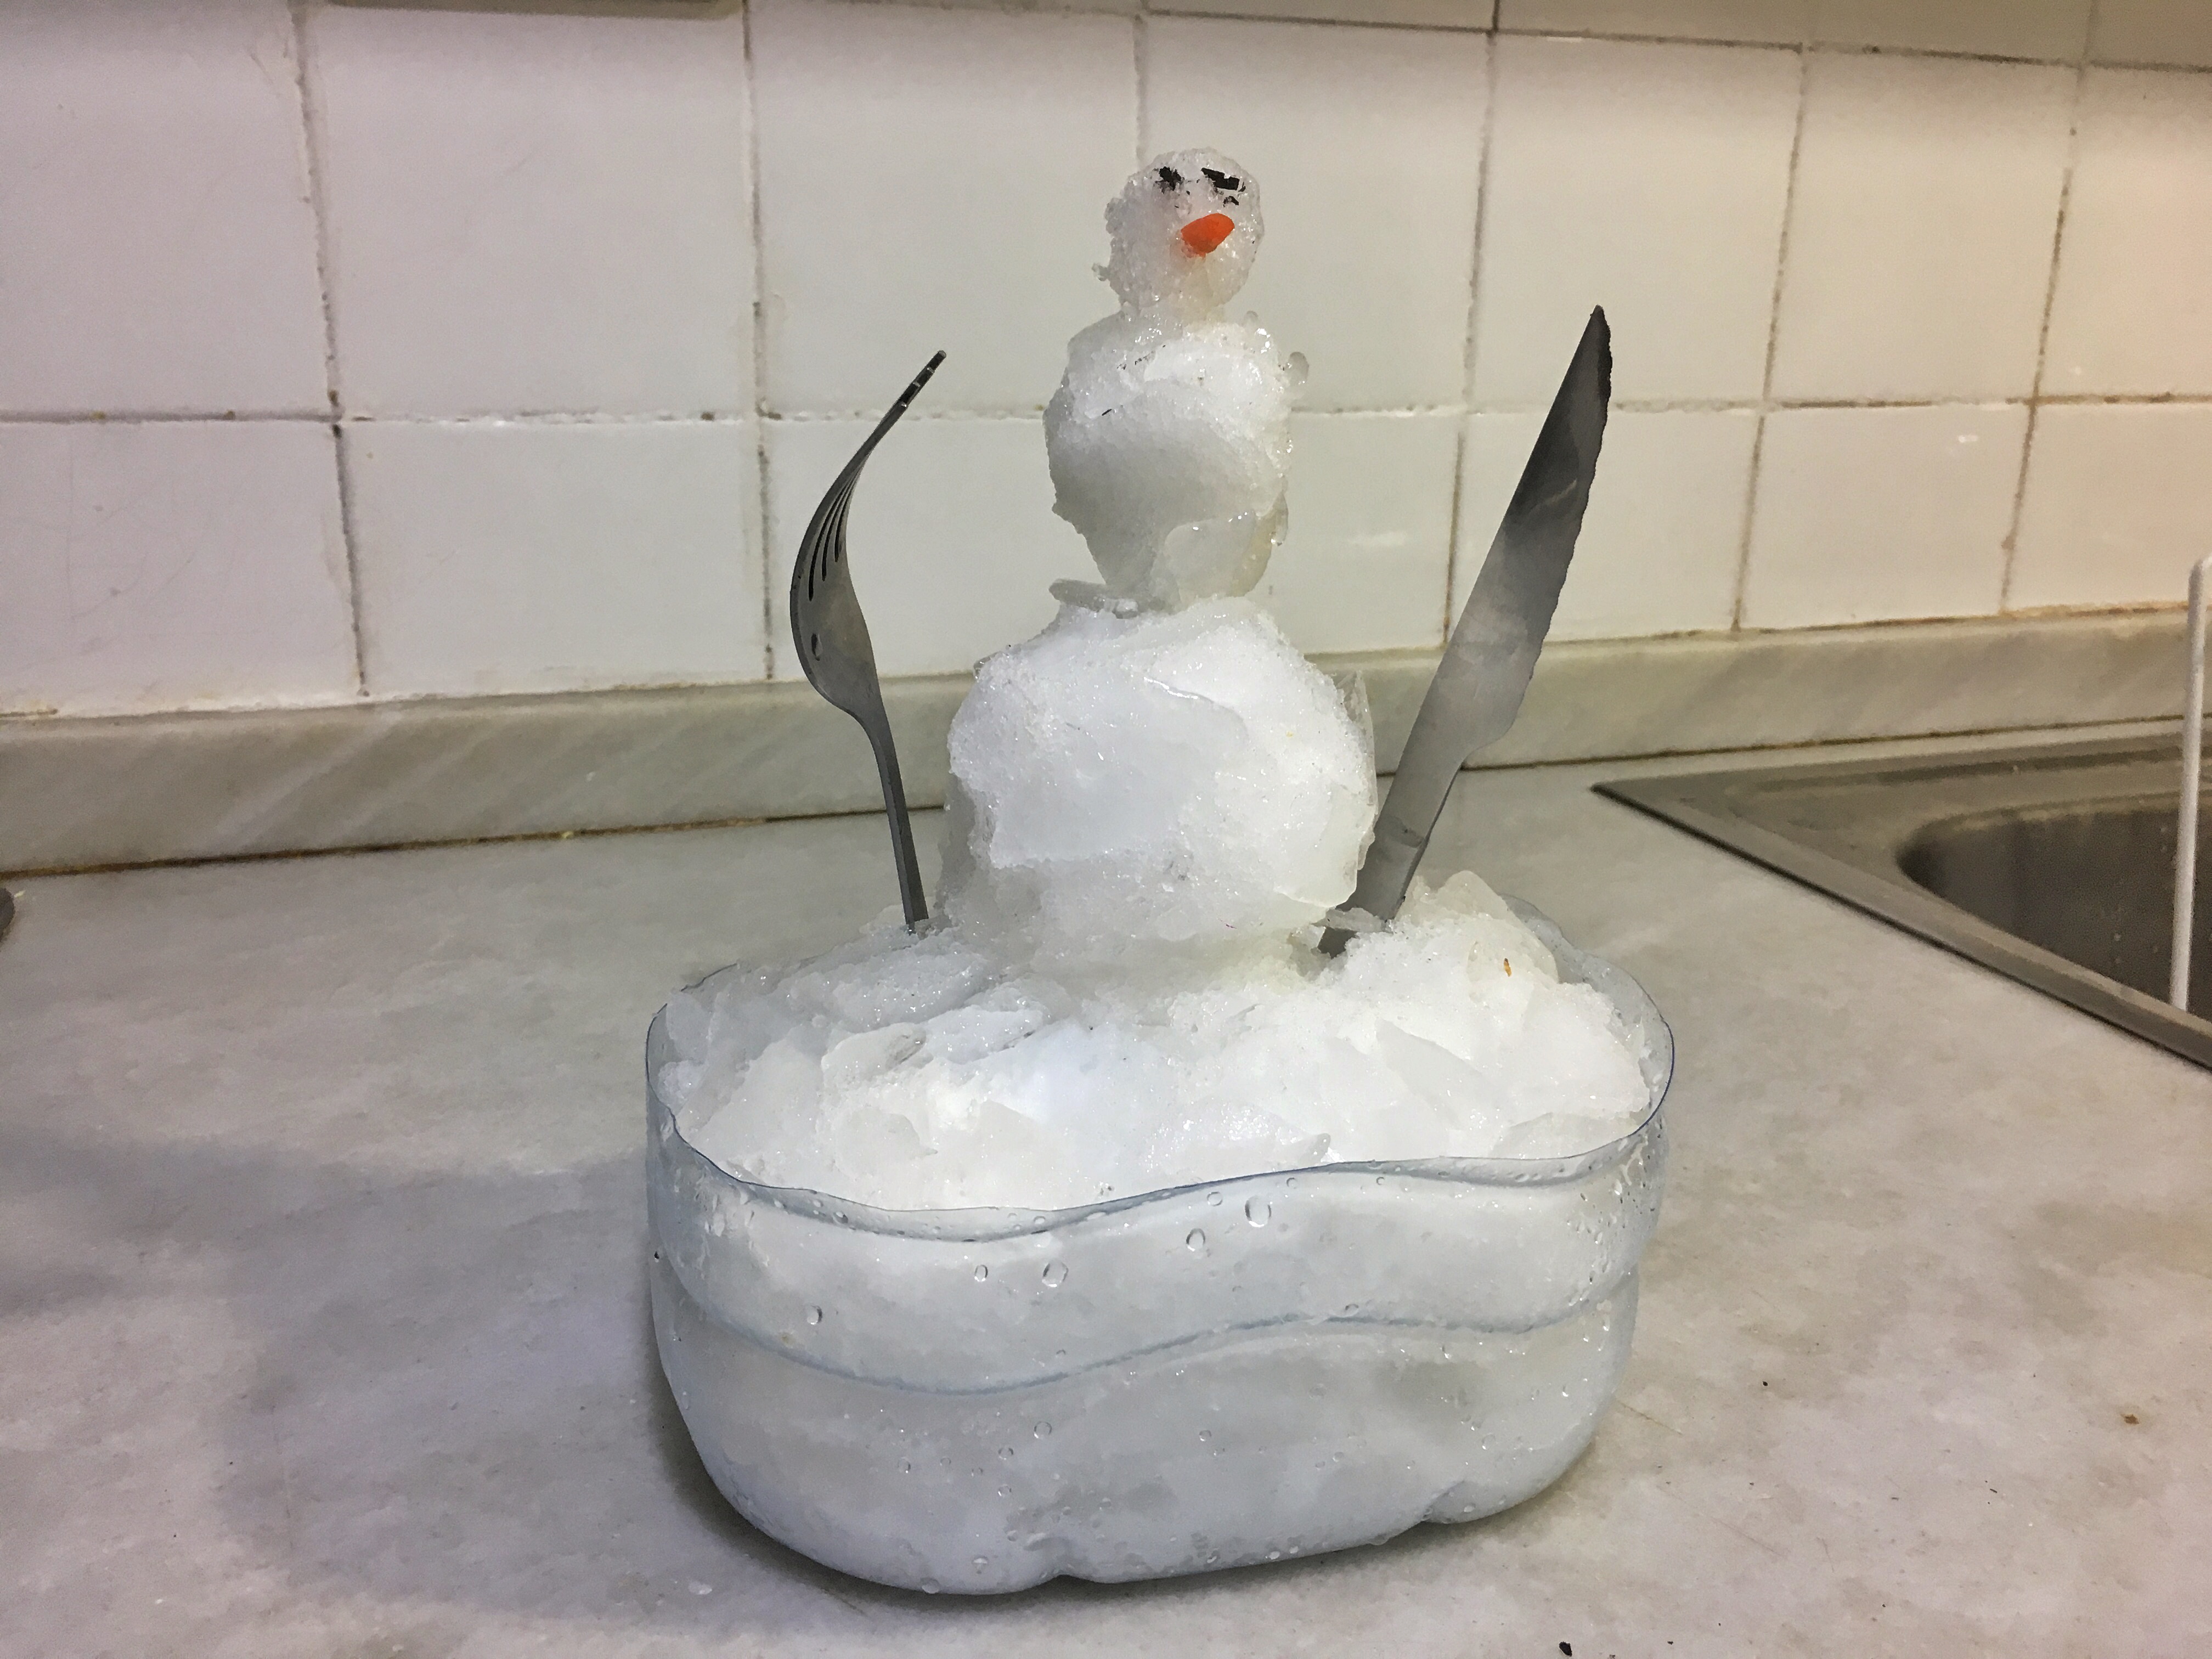 the finished snowman